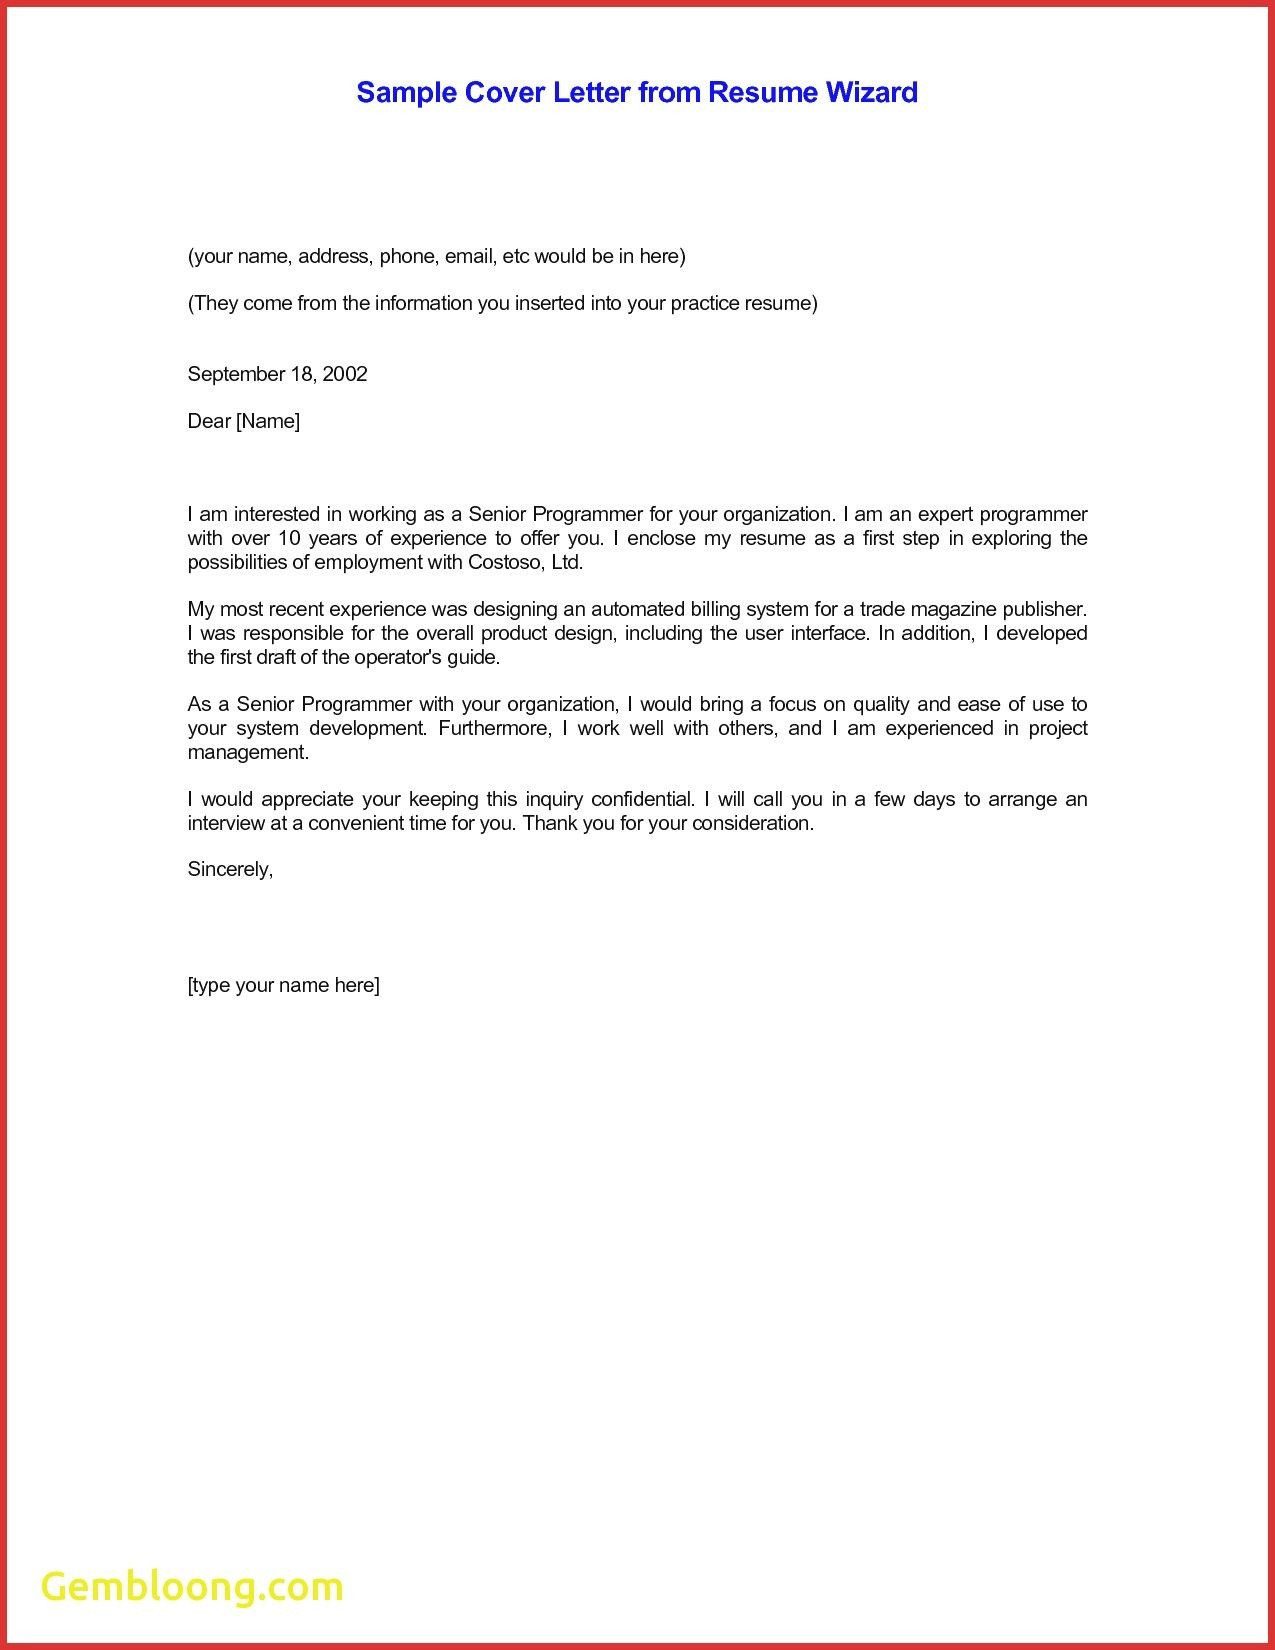 Sample Email for Sending A Resume and Cover Letter Email Cv Cover Letter Template – Resume format Cover Letter for …